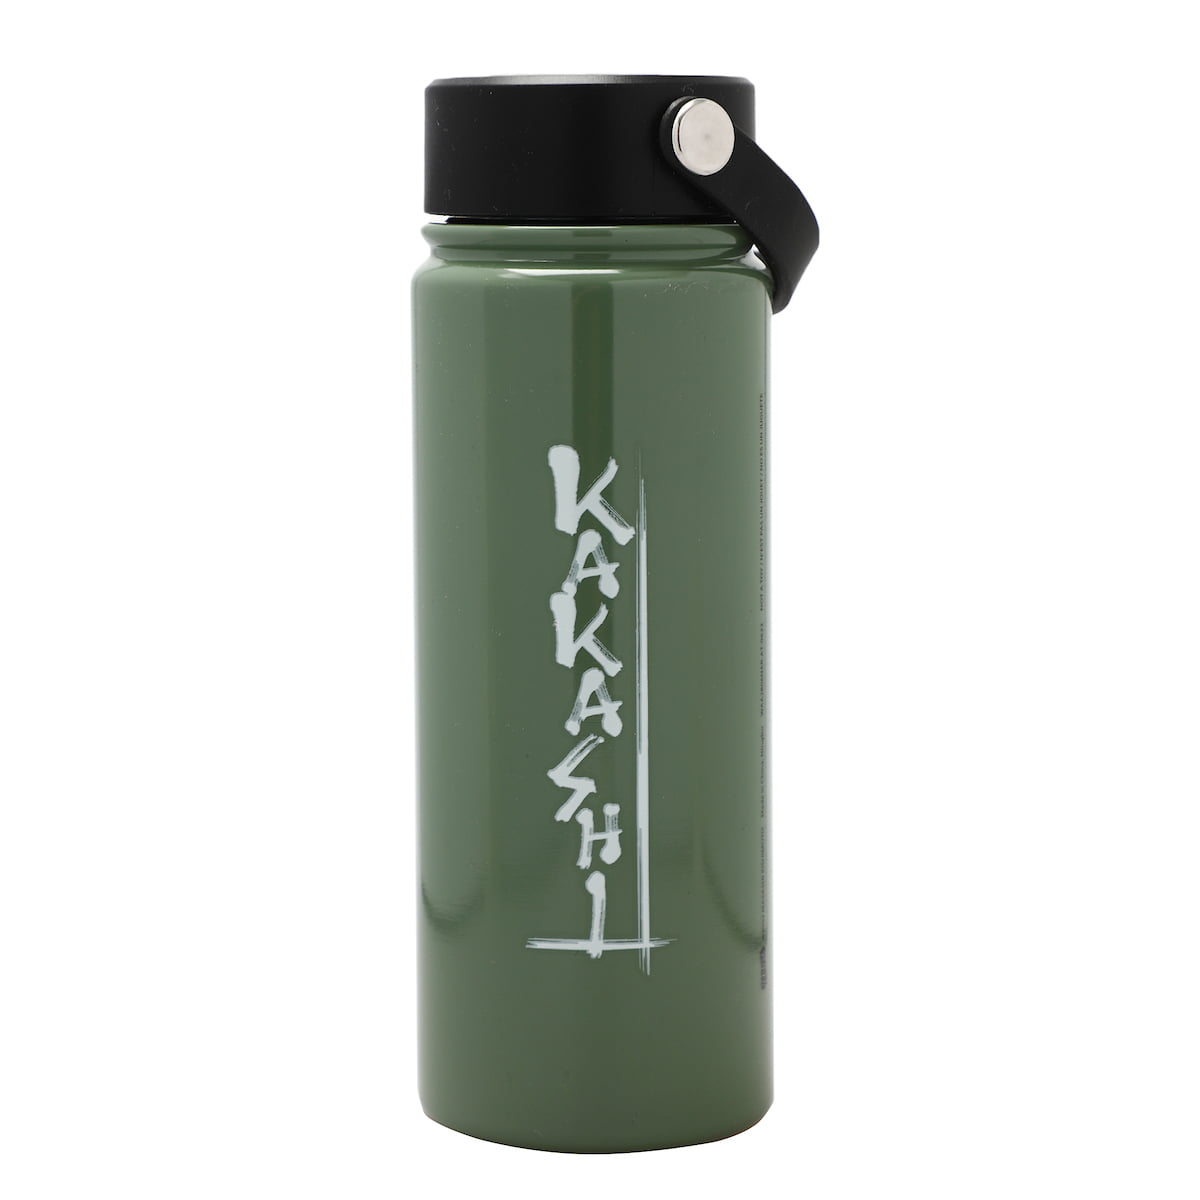 Naruto Kakashi In The Clouds 17 Oz Stainless Steel Water Bottle